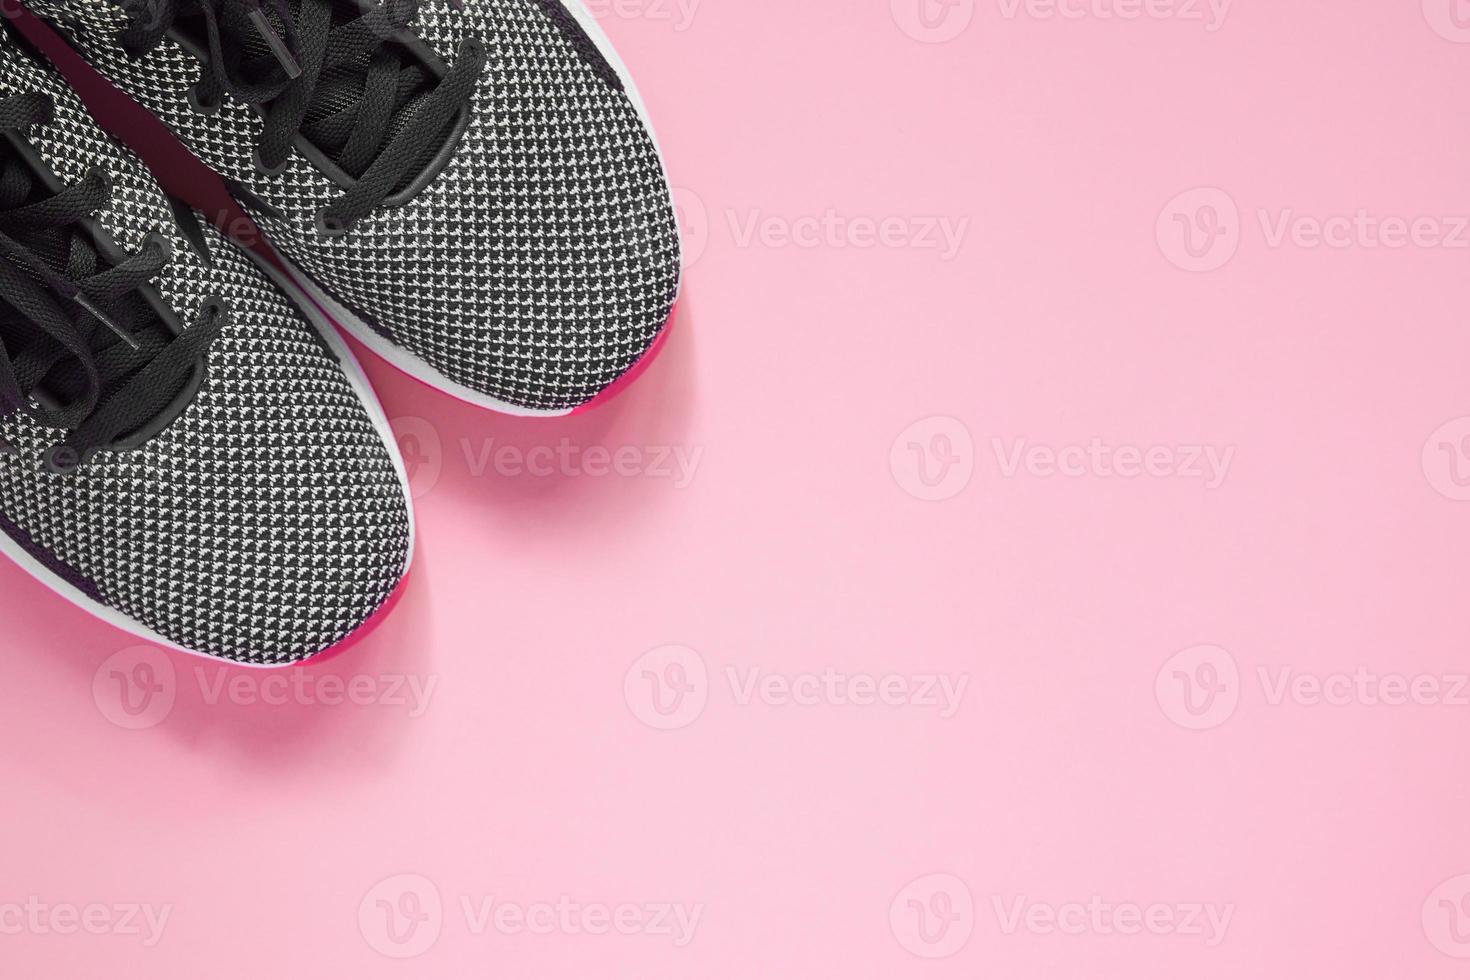 Sport Shoe on pink background. Black and white female sneakers for training. Lifestyle concept with copy space. Top view photo